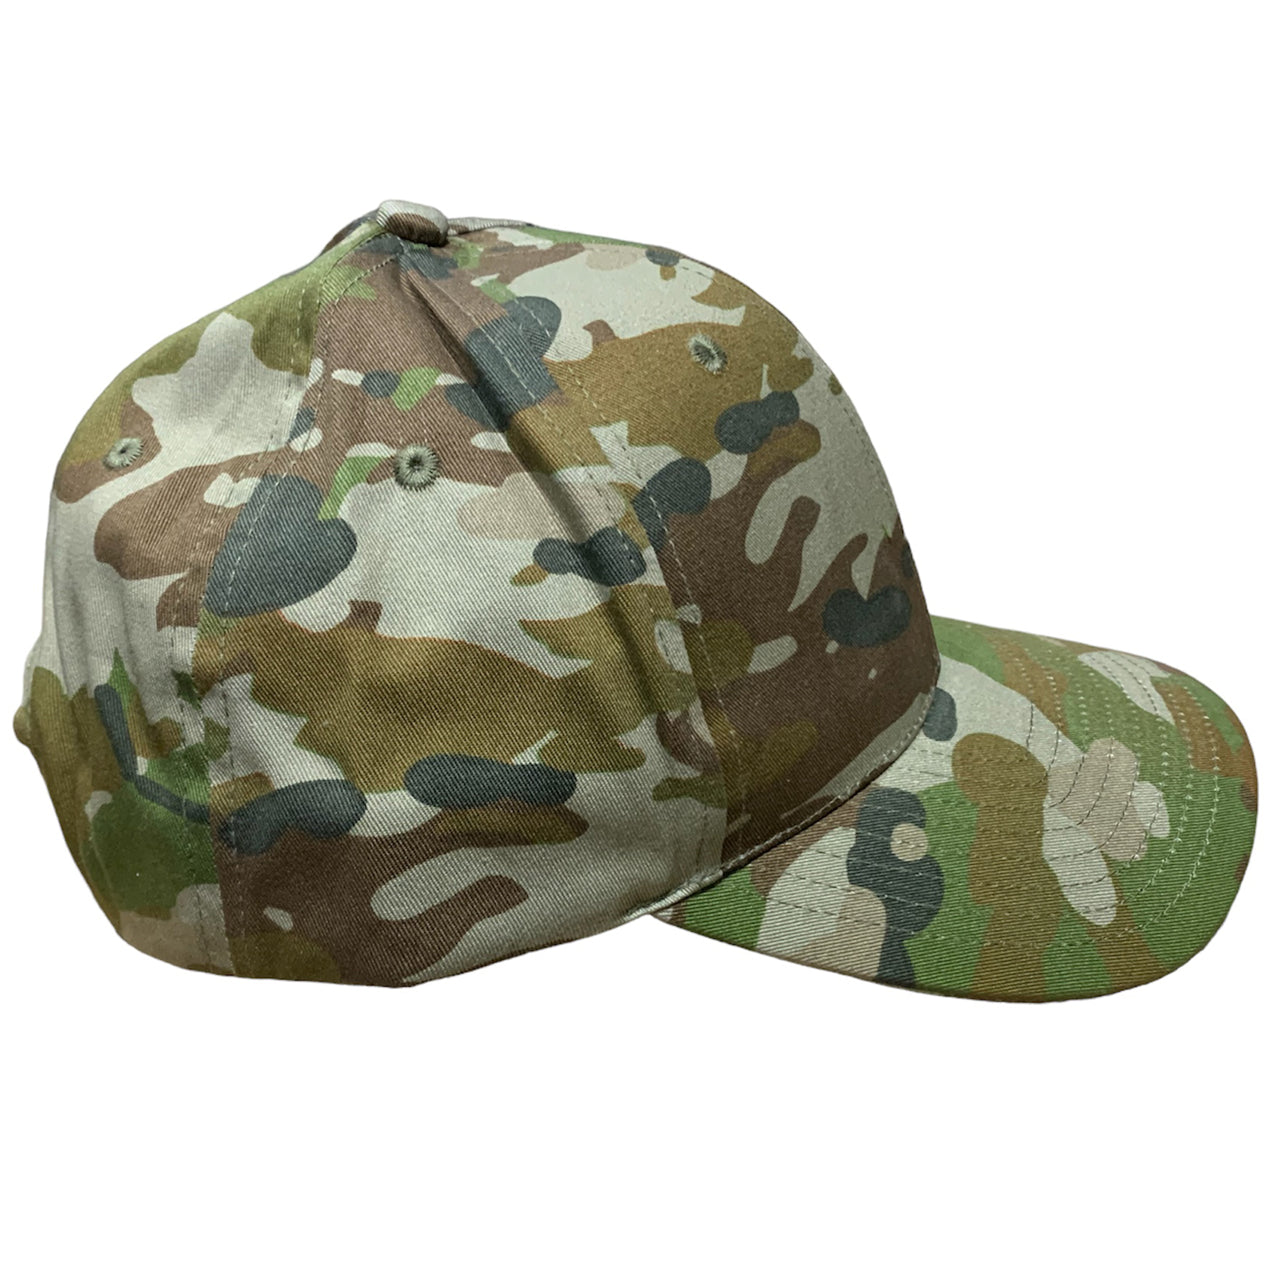 Experience the ultimate in comfort and style with the Army Australian Multicam Baseball Cap. This cap features an adjustable hook & loop back for a perfect fit, making it a One Size Fits All option. Upgrade your headwear game with this versatile and trendy cap! www.defenceqstore.com.au side view of amcu